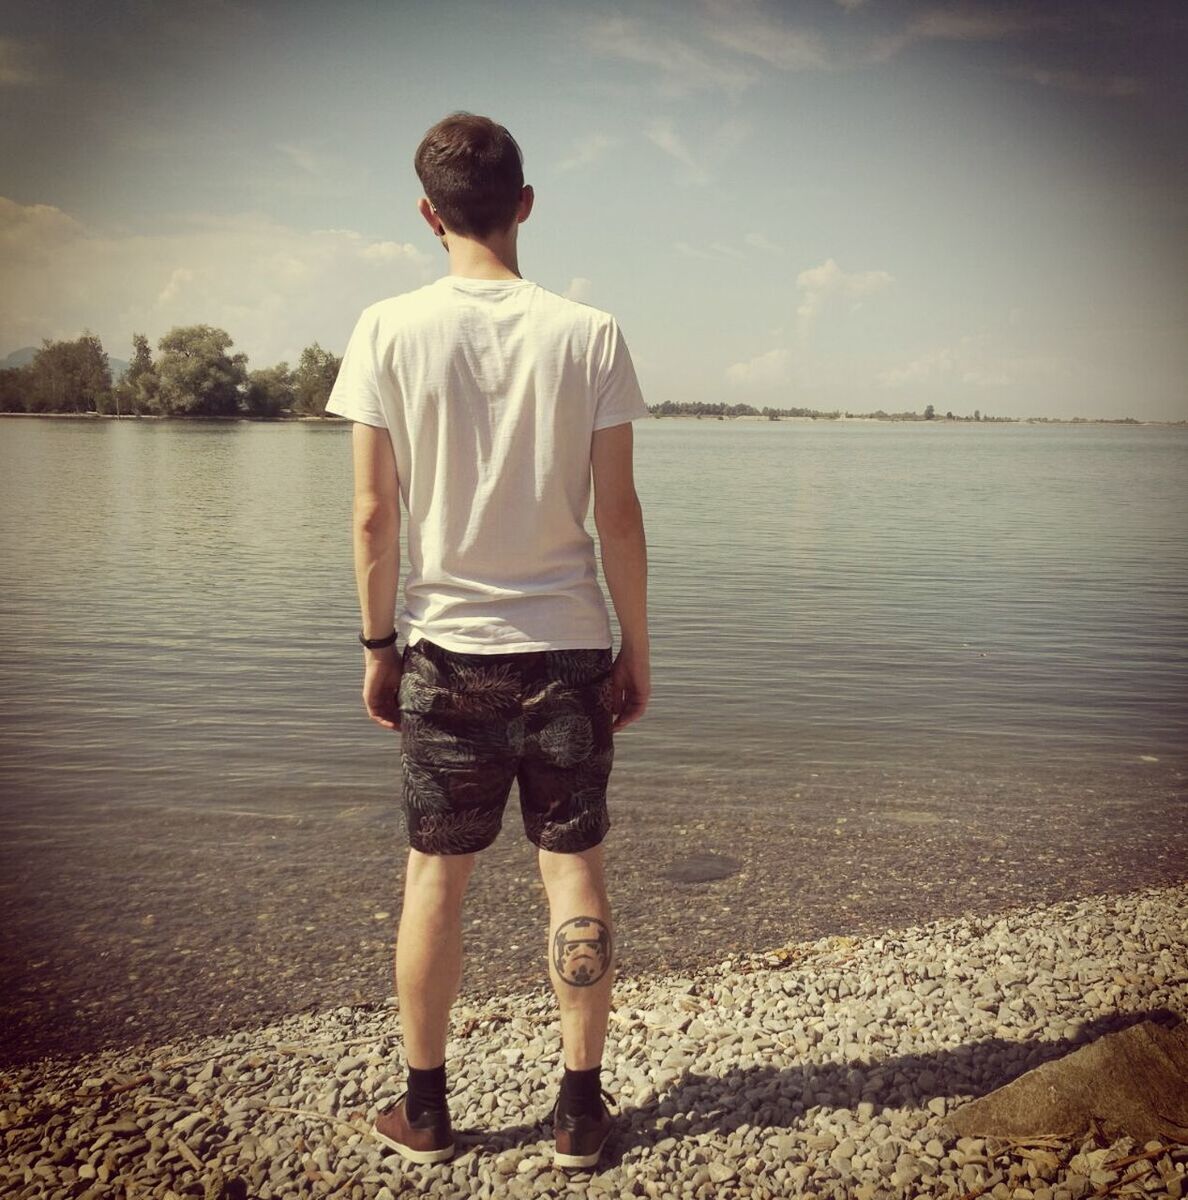 Rear view of man with tattoo on leg standing at shore against sky